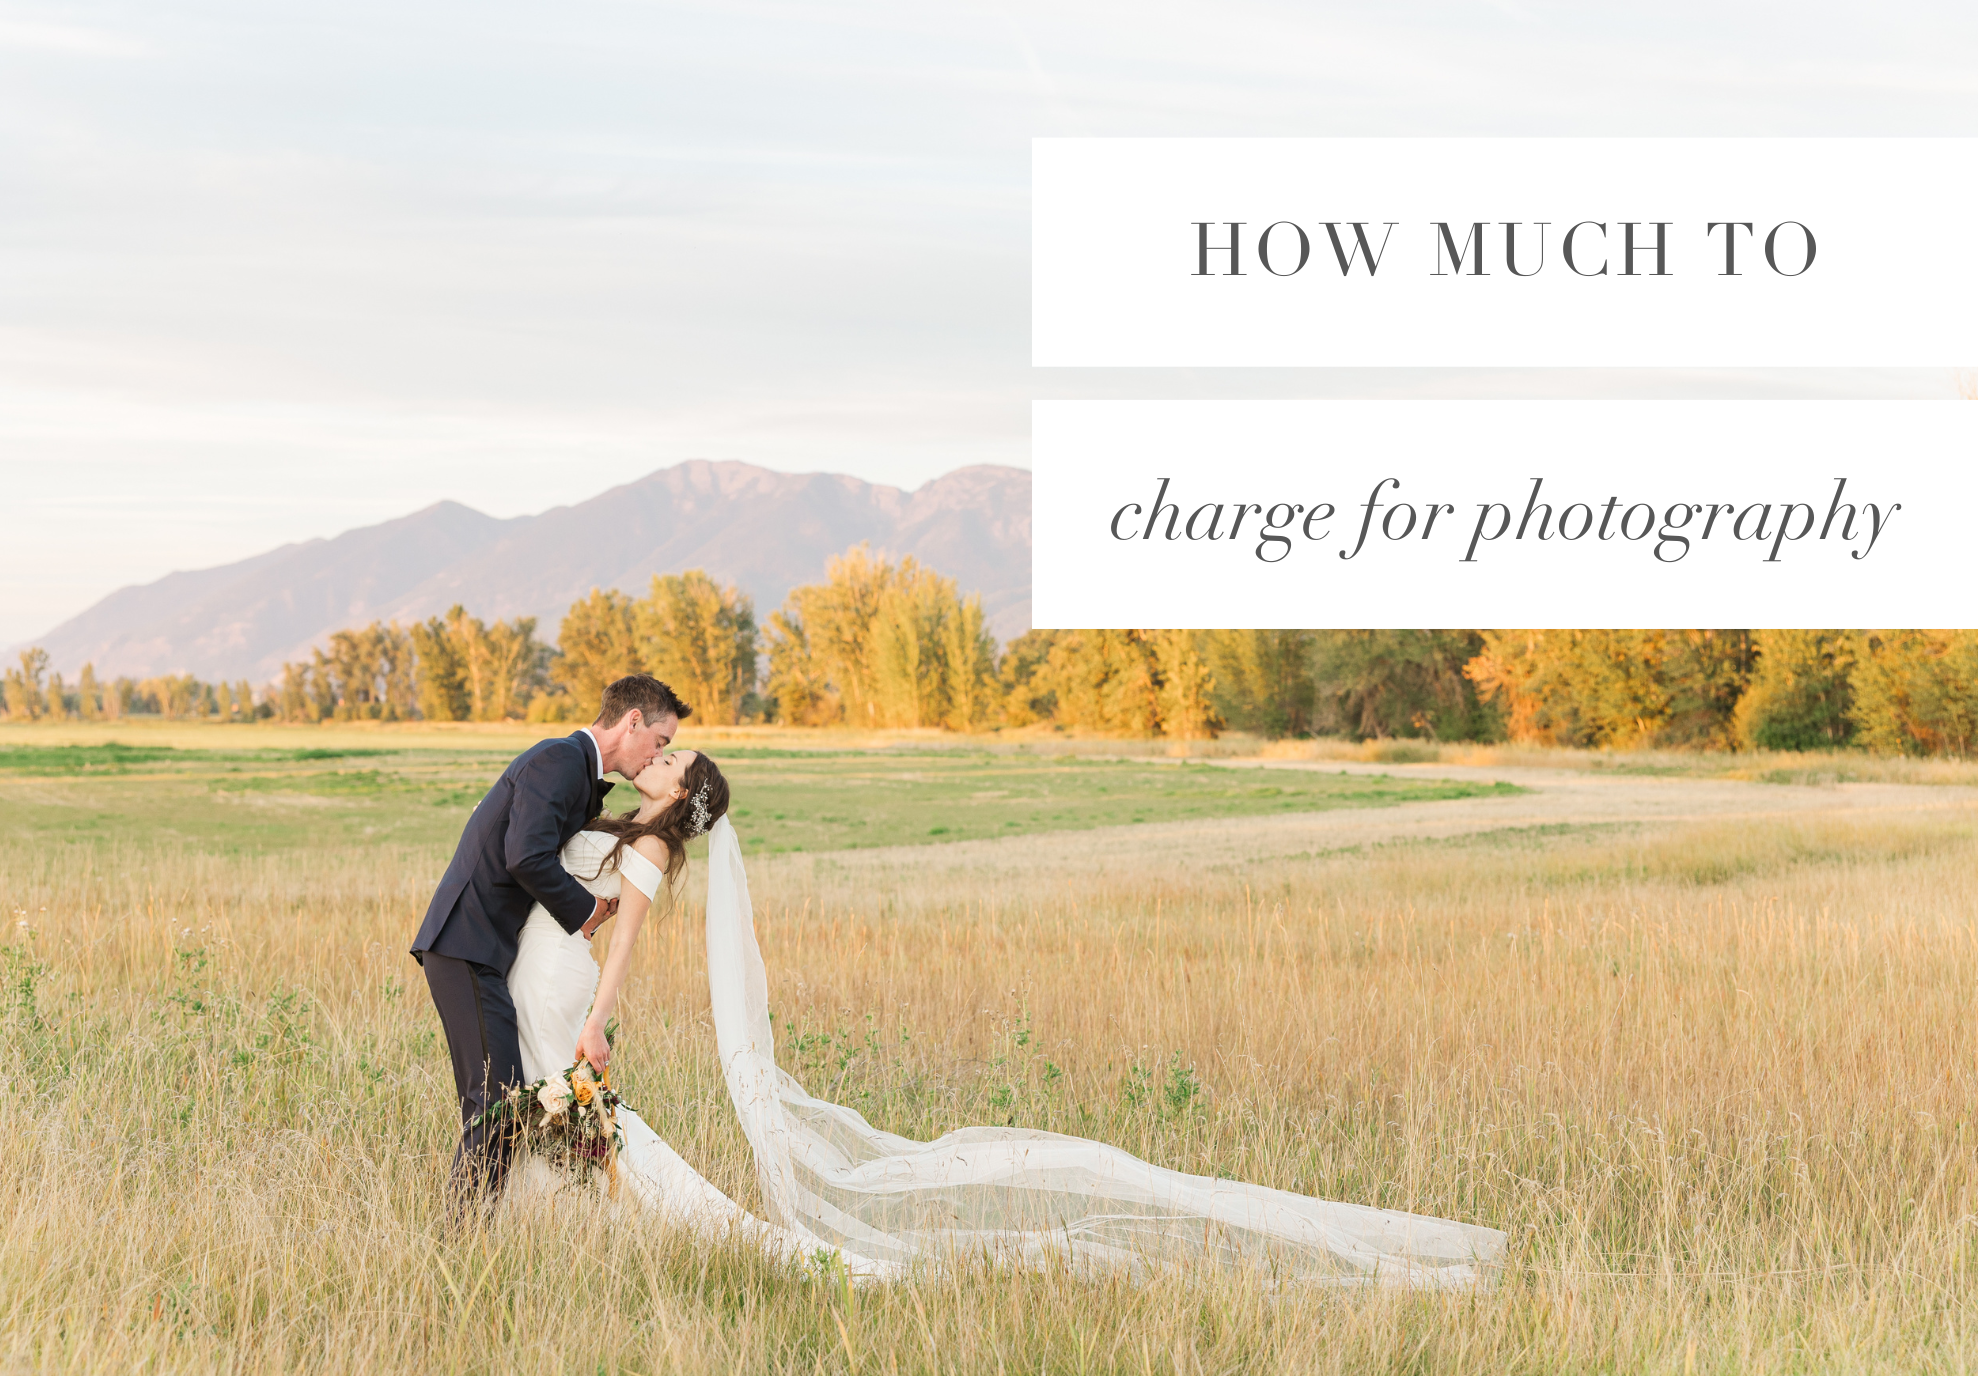 HOW MUCH TO CHARGE FOR WEDDING PHOTOGRAPHY